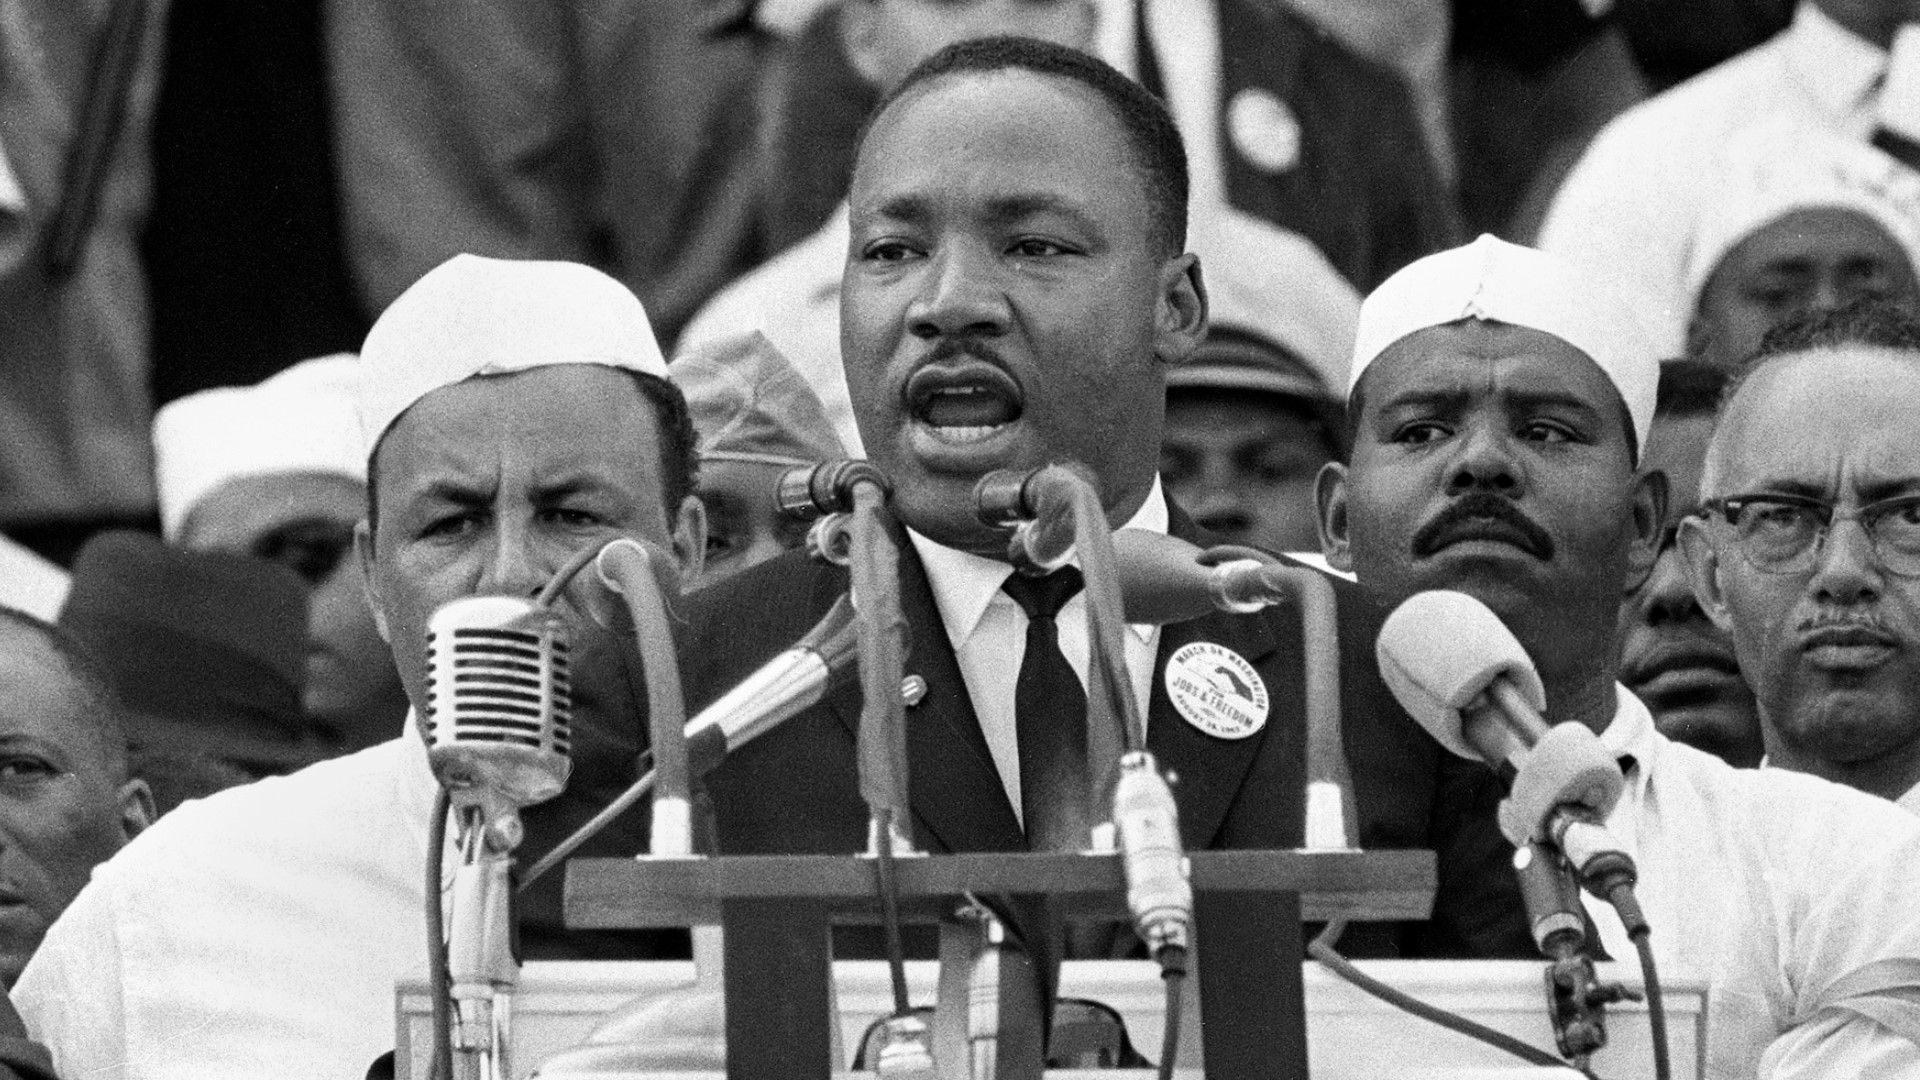 Remember and honor the legacy of the great Dr. Martin Luther King Jr. today  and every day, by doing what is right, even when it's hard.…